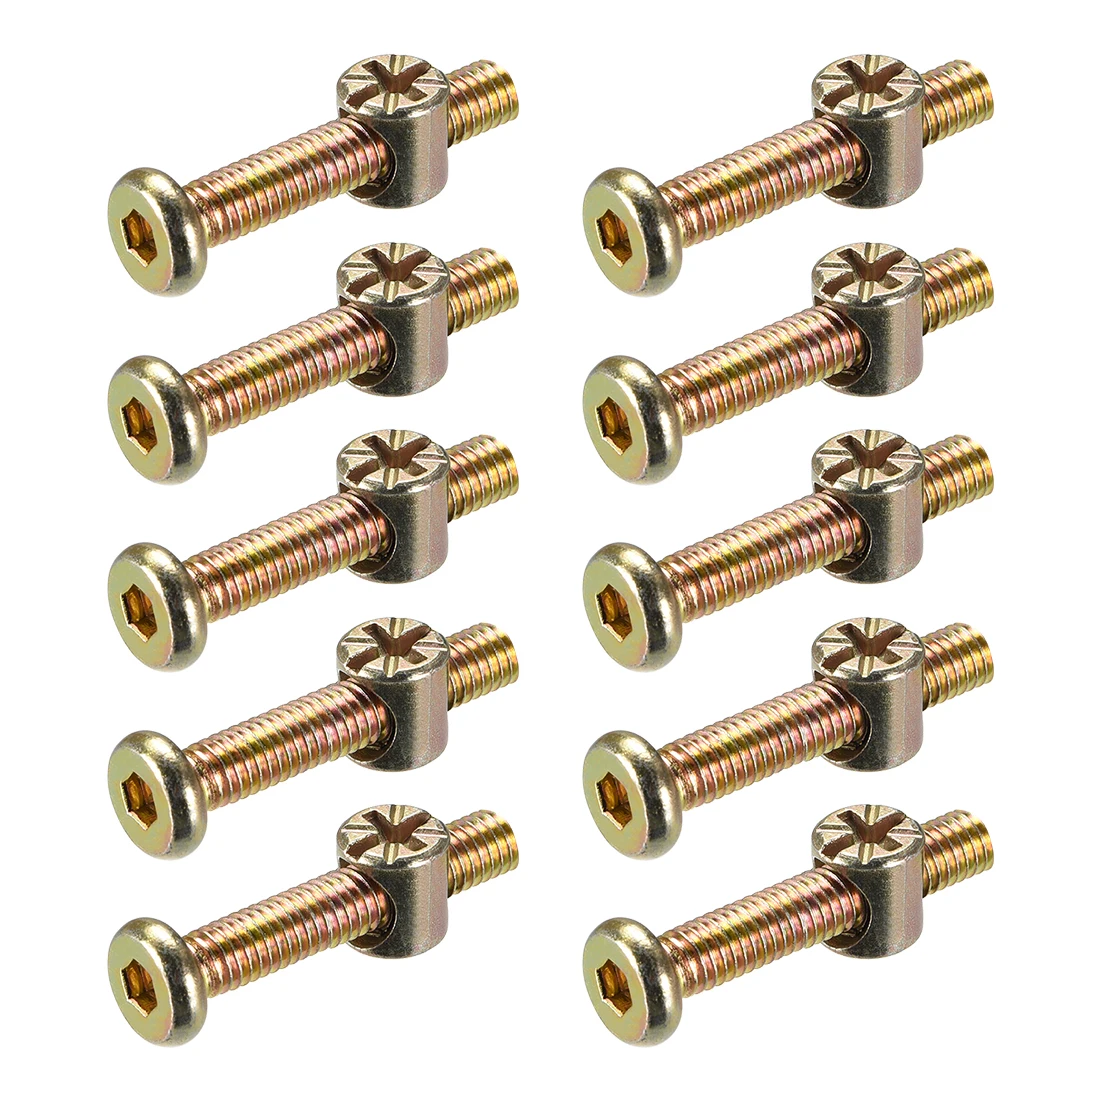 

uxcell M6 x 40mm Furniture Bolts Nut Set Hex Socket Screw with Barrel Nuts Phillips-Slotted Zinc Plated 20 Sets